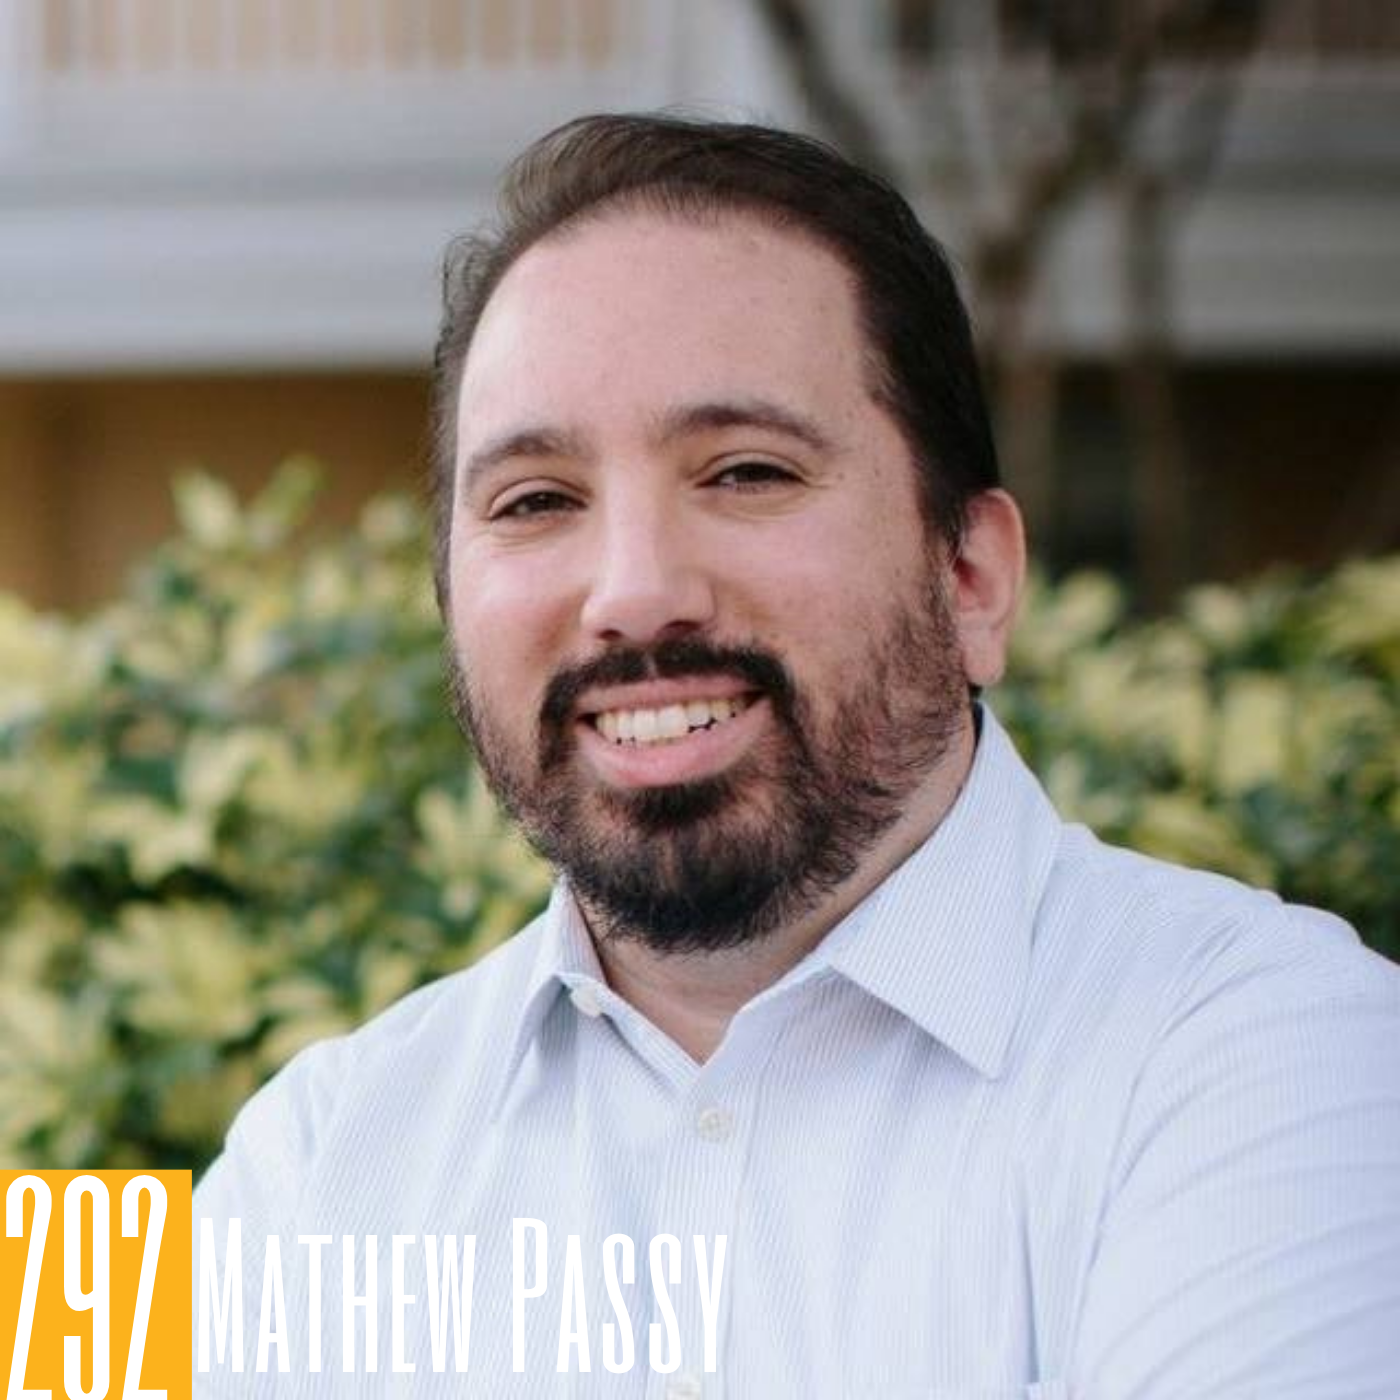 292 Mathew Passy - Storytelling & Connecting with Audiences Over Corporatization in Podcasts